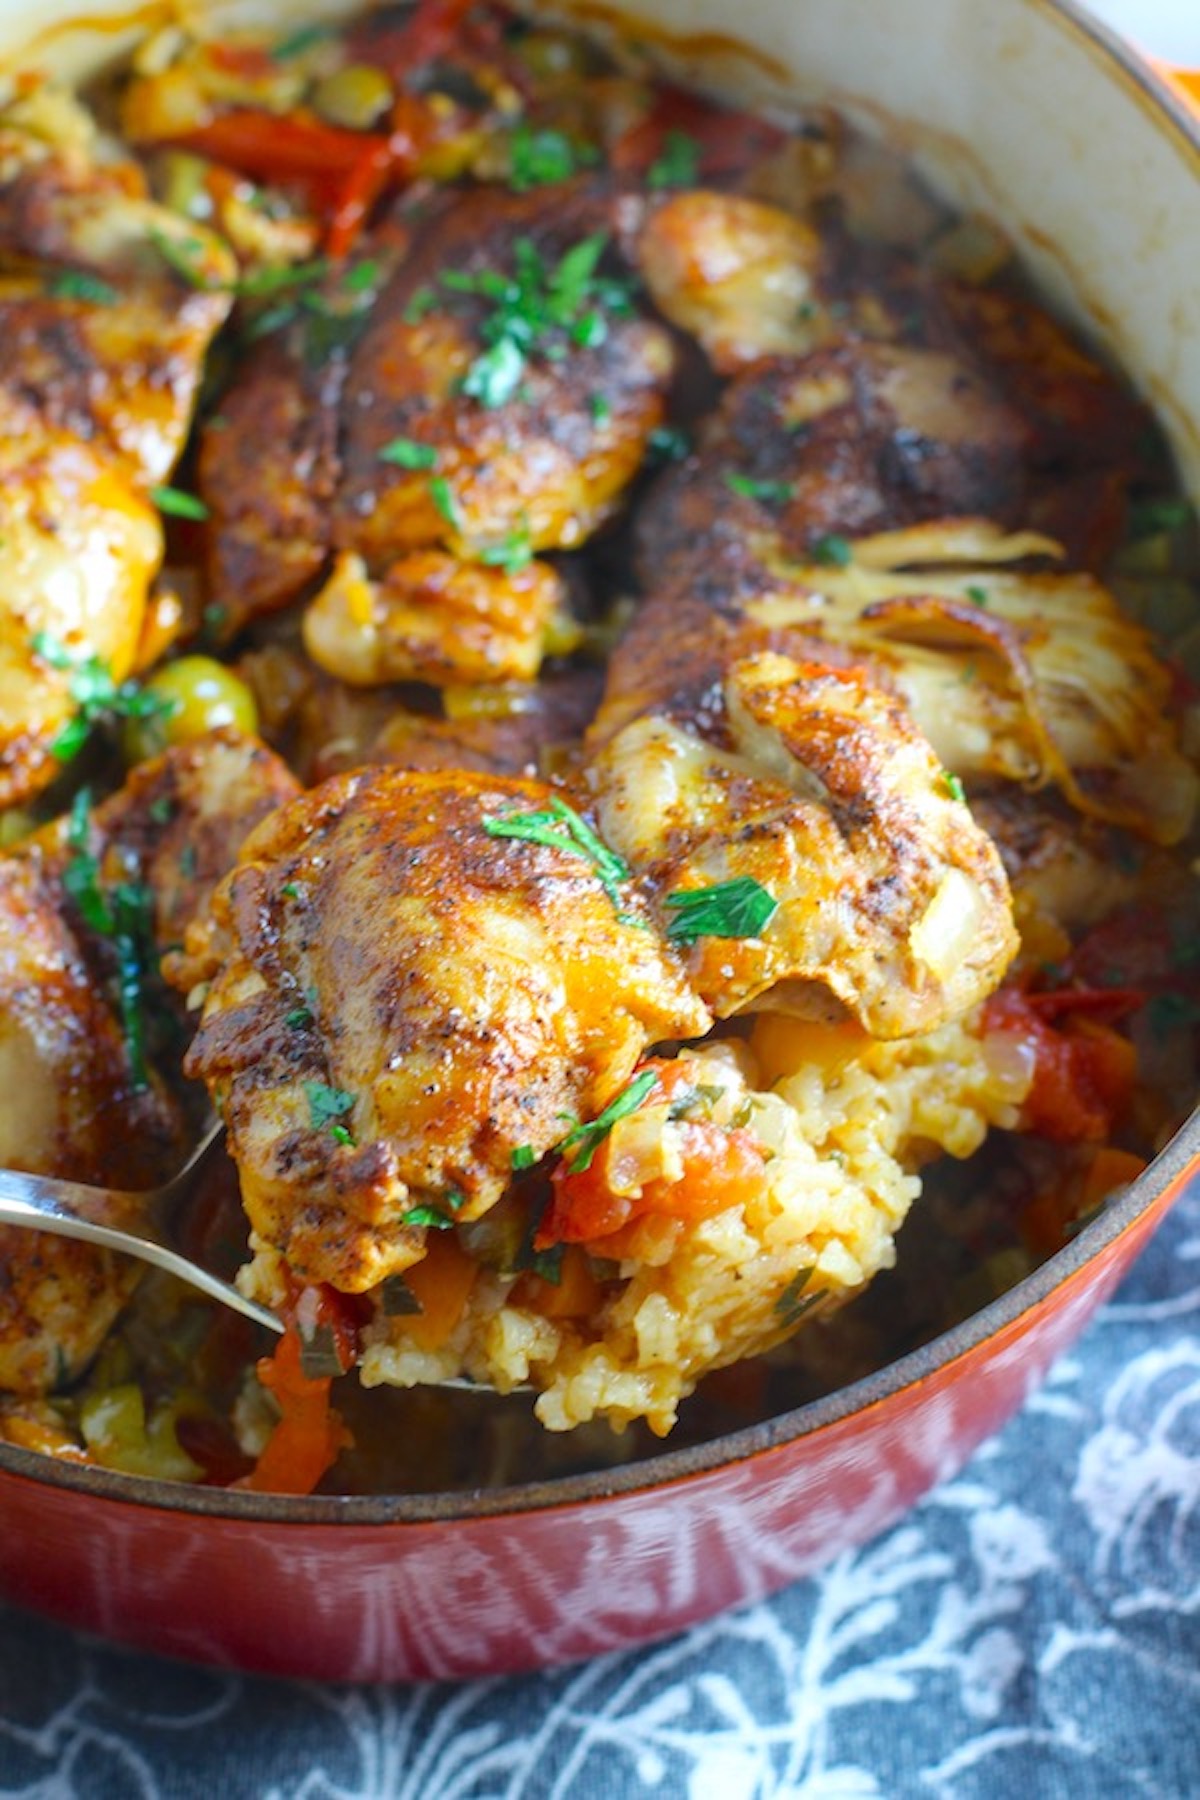 Photo of Spanish Chicken and Rice in in a Red Pot - by Talking Meals